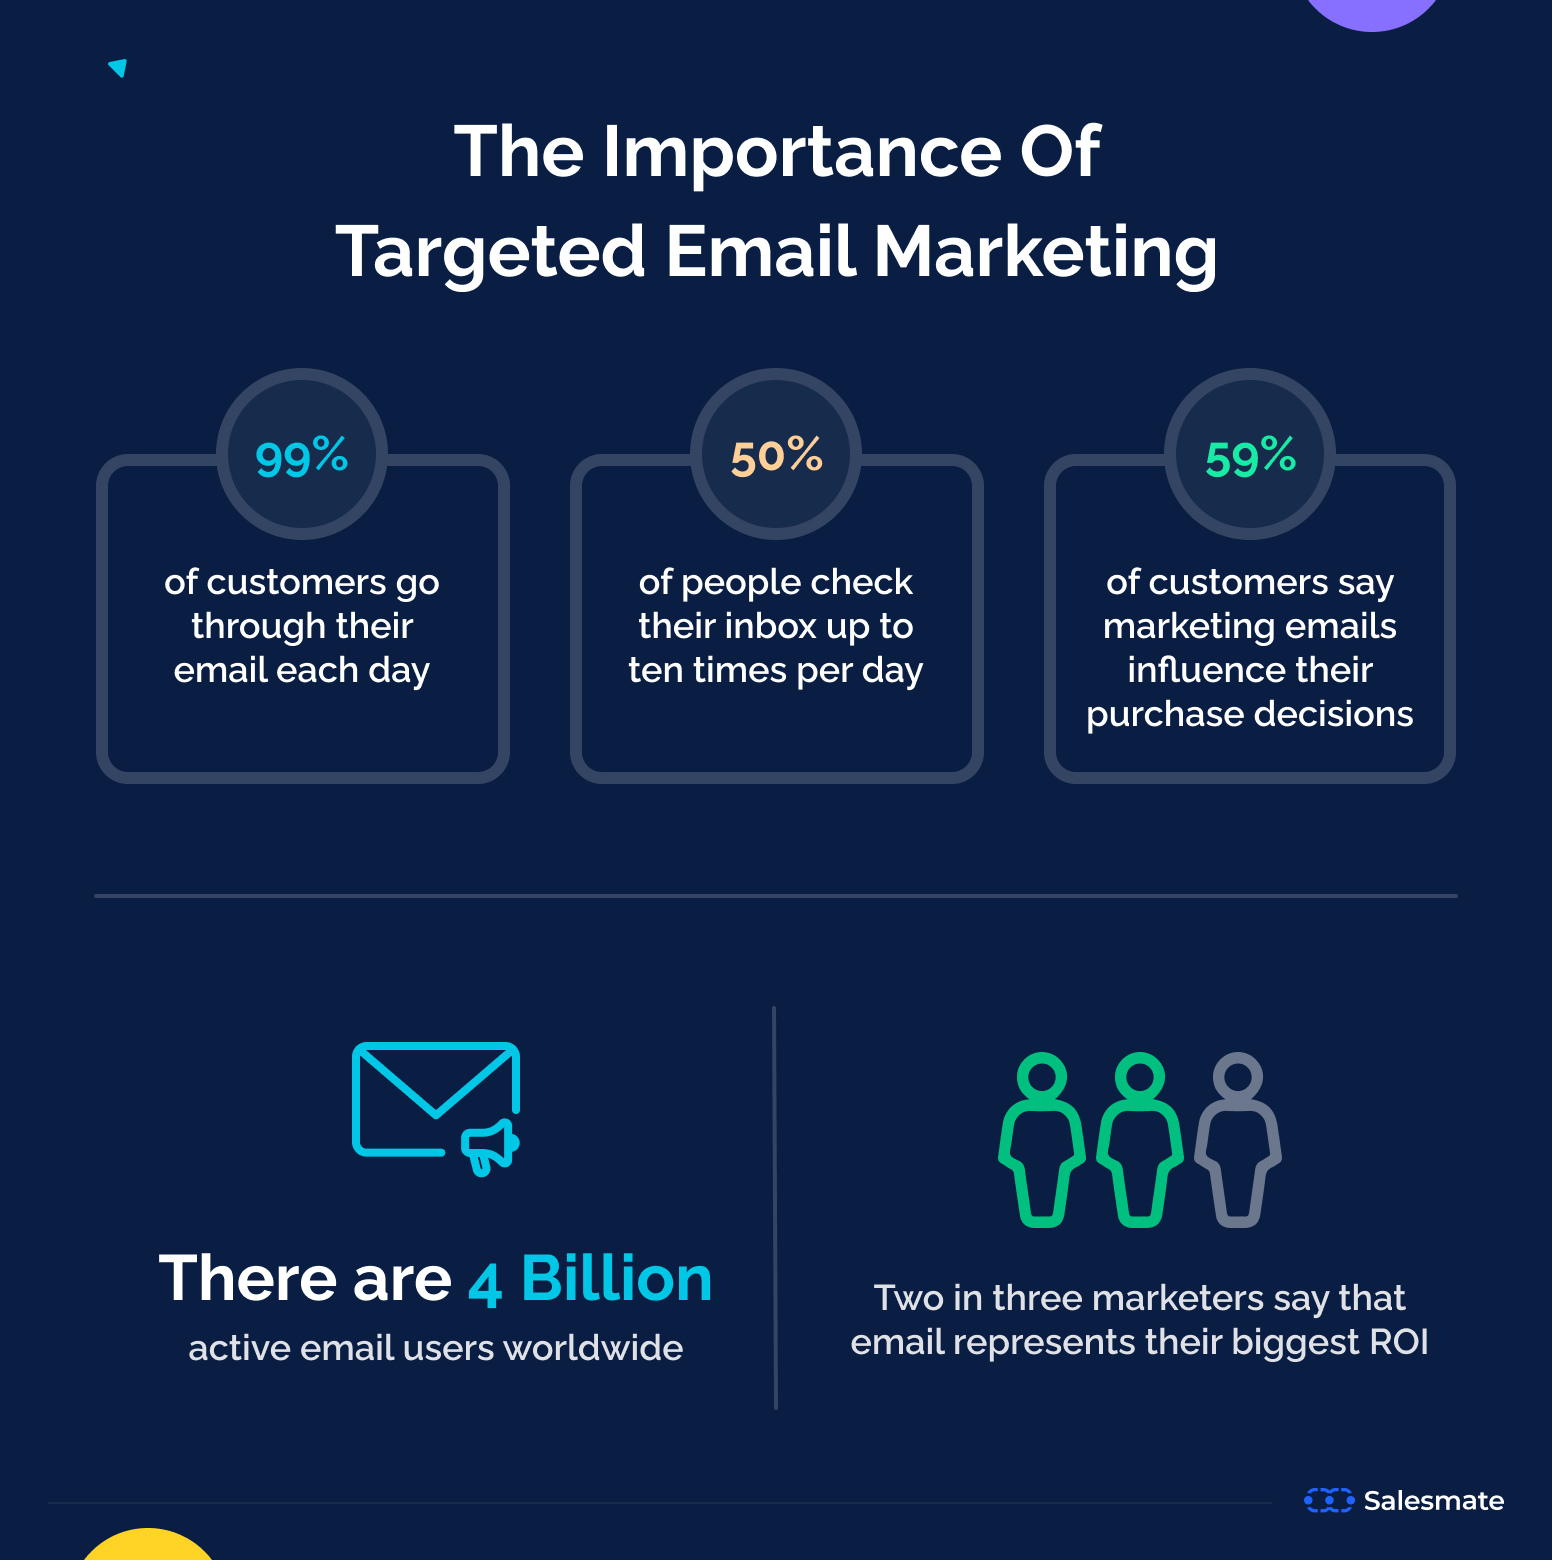 How Can Email Marketing Fuel Your Overall Inbound Strategy